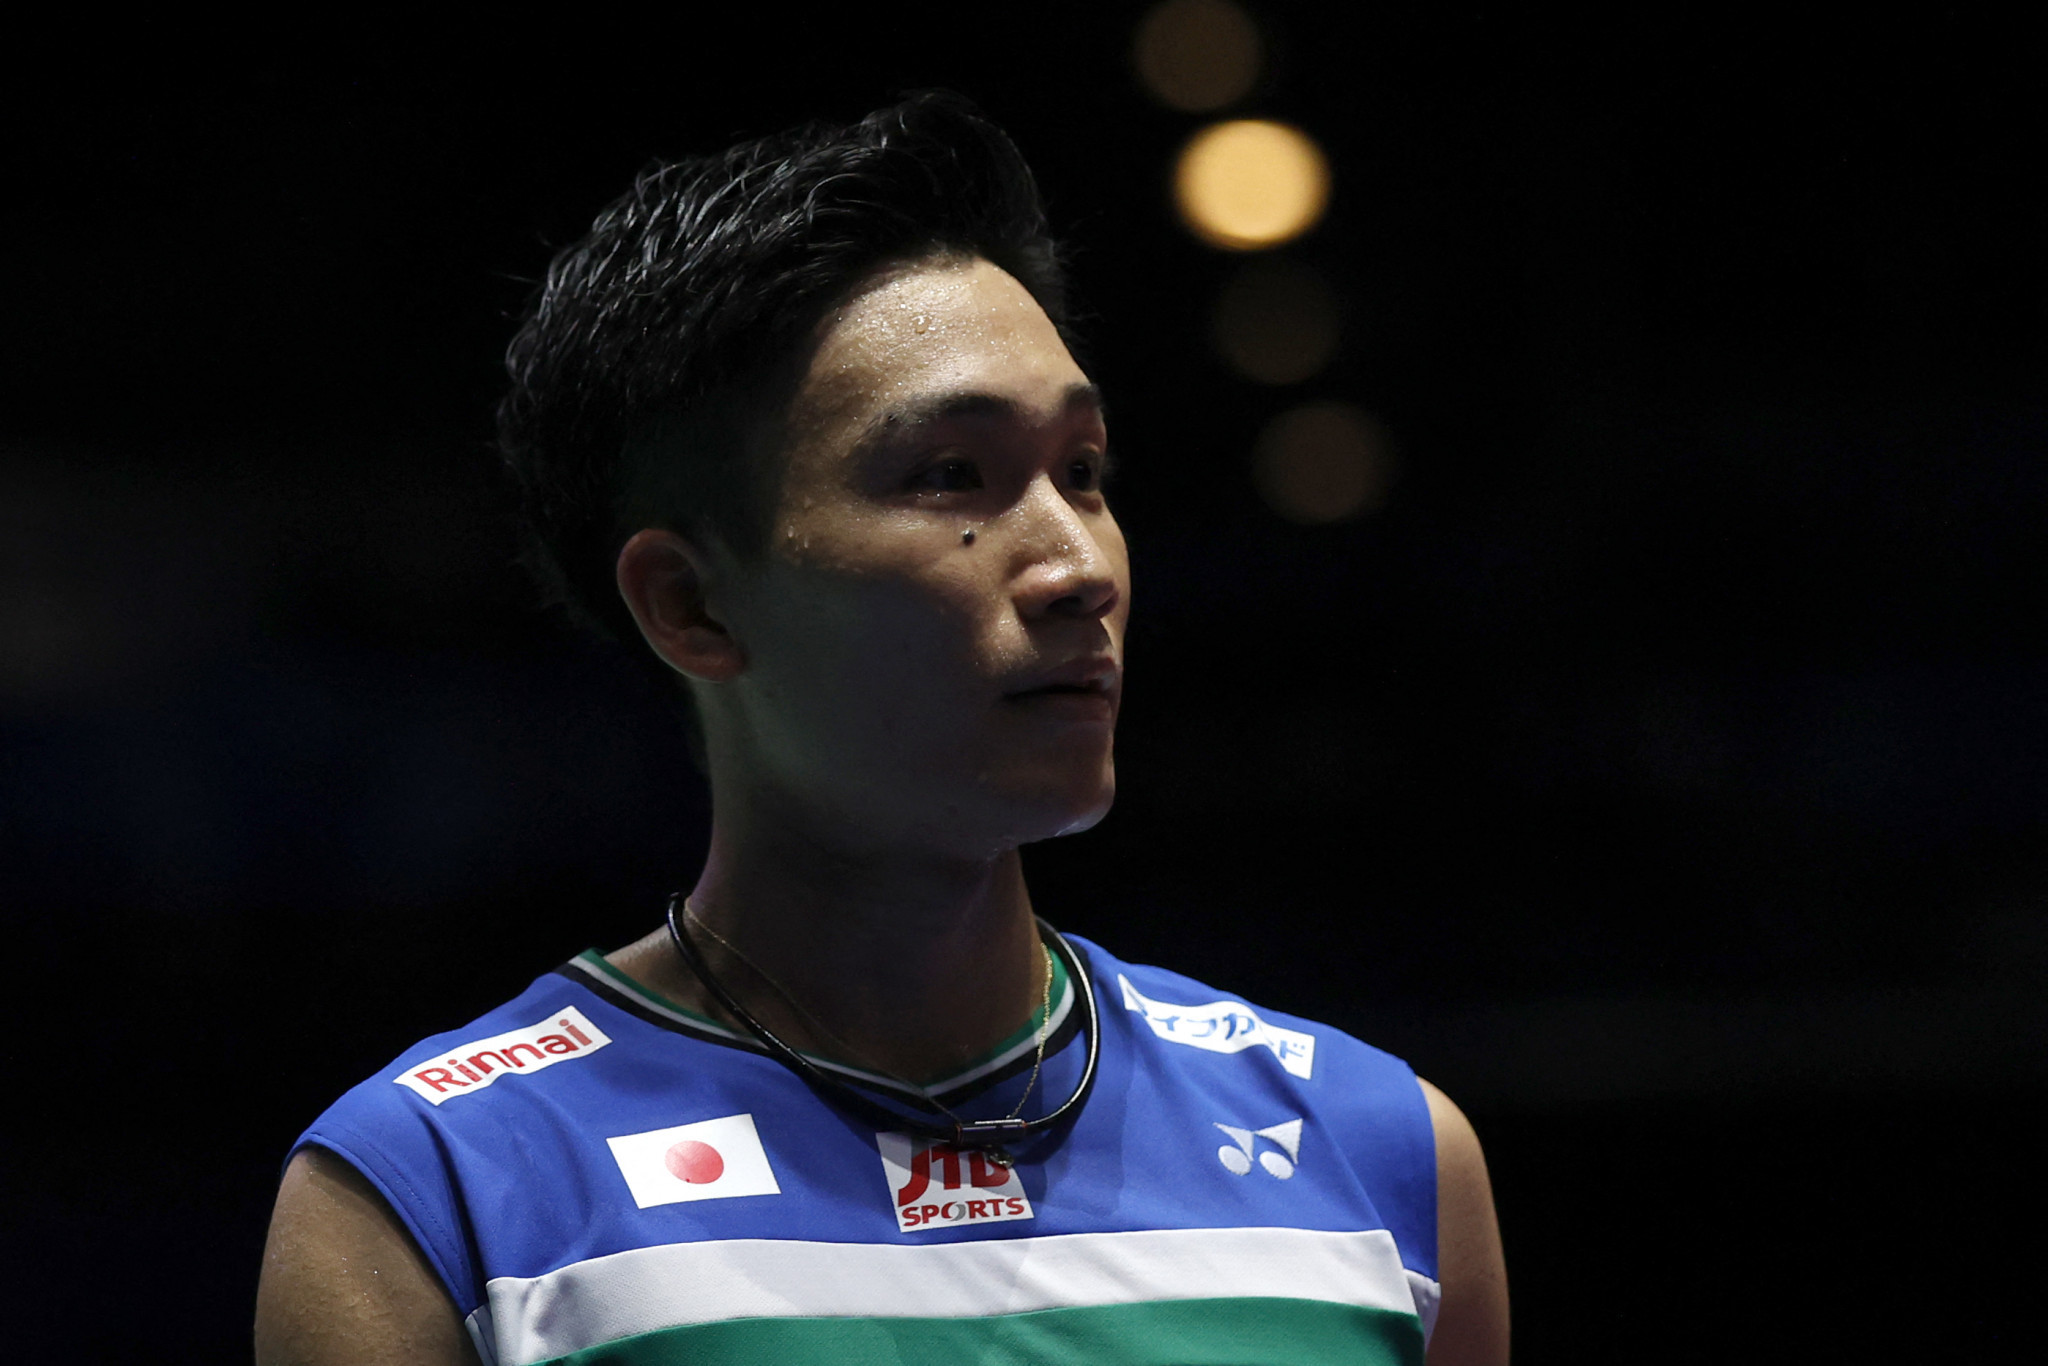 Kento Momota has been knocked out of the men's singles at the All England Open ©Getty Images